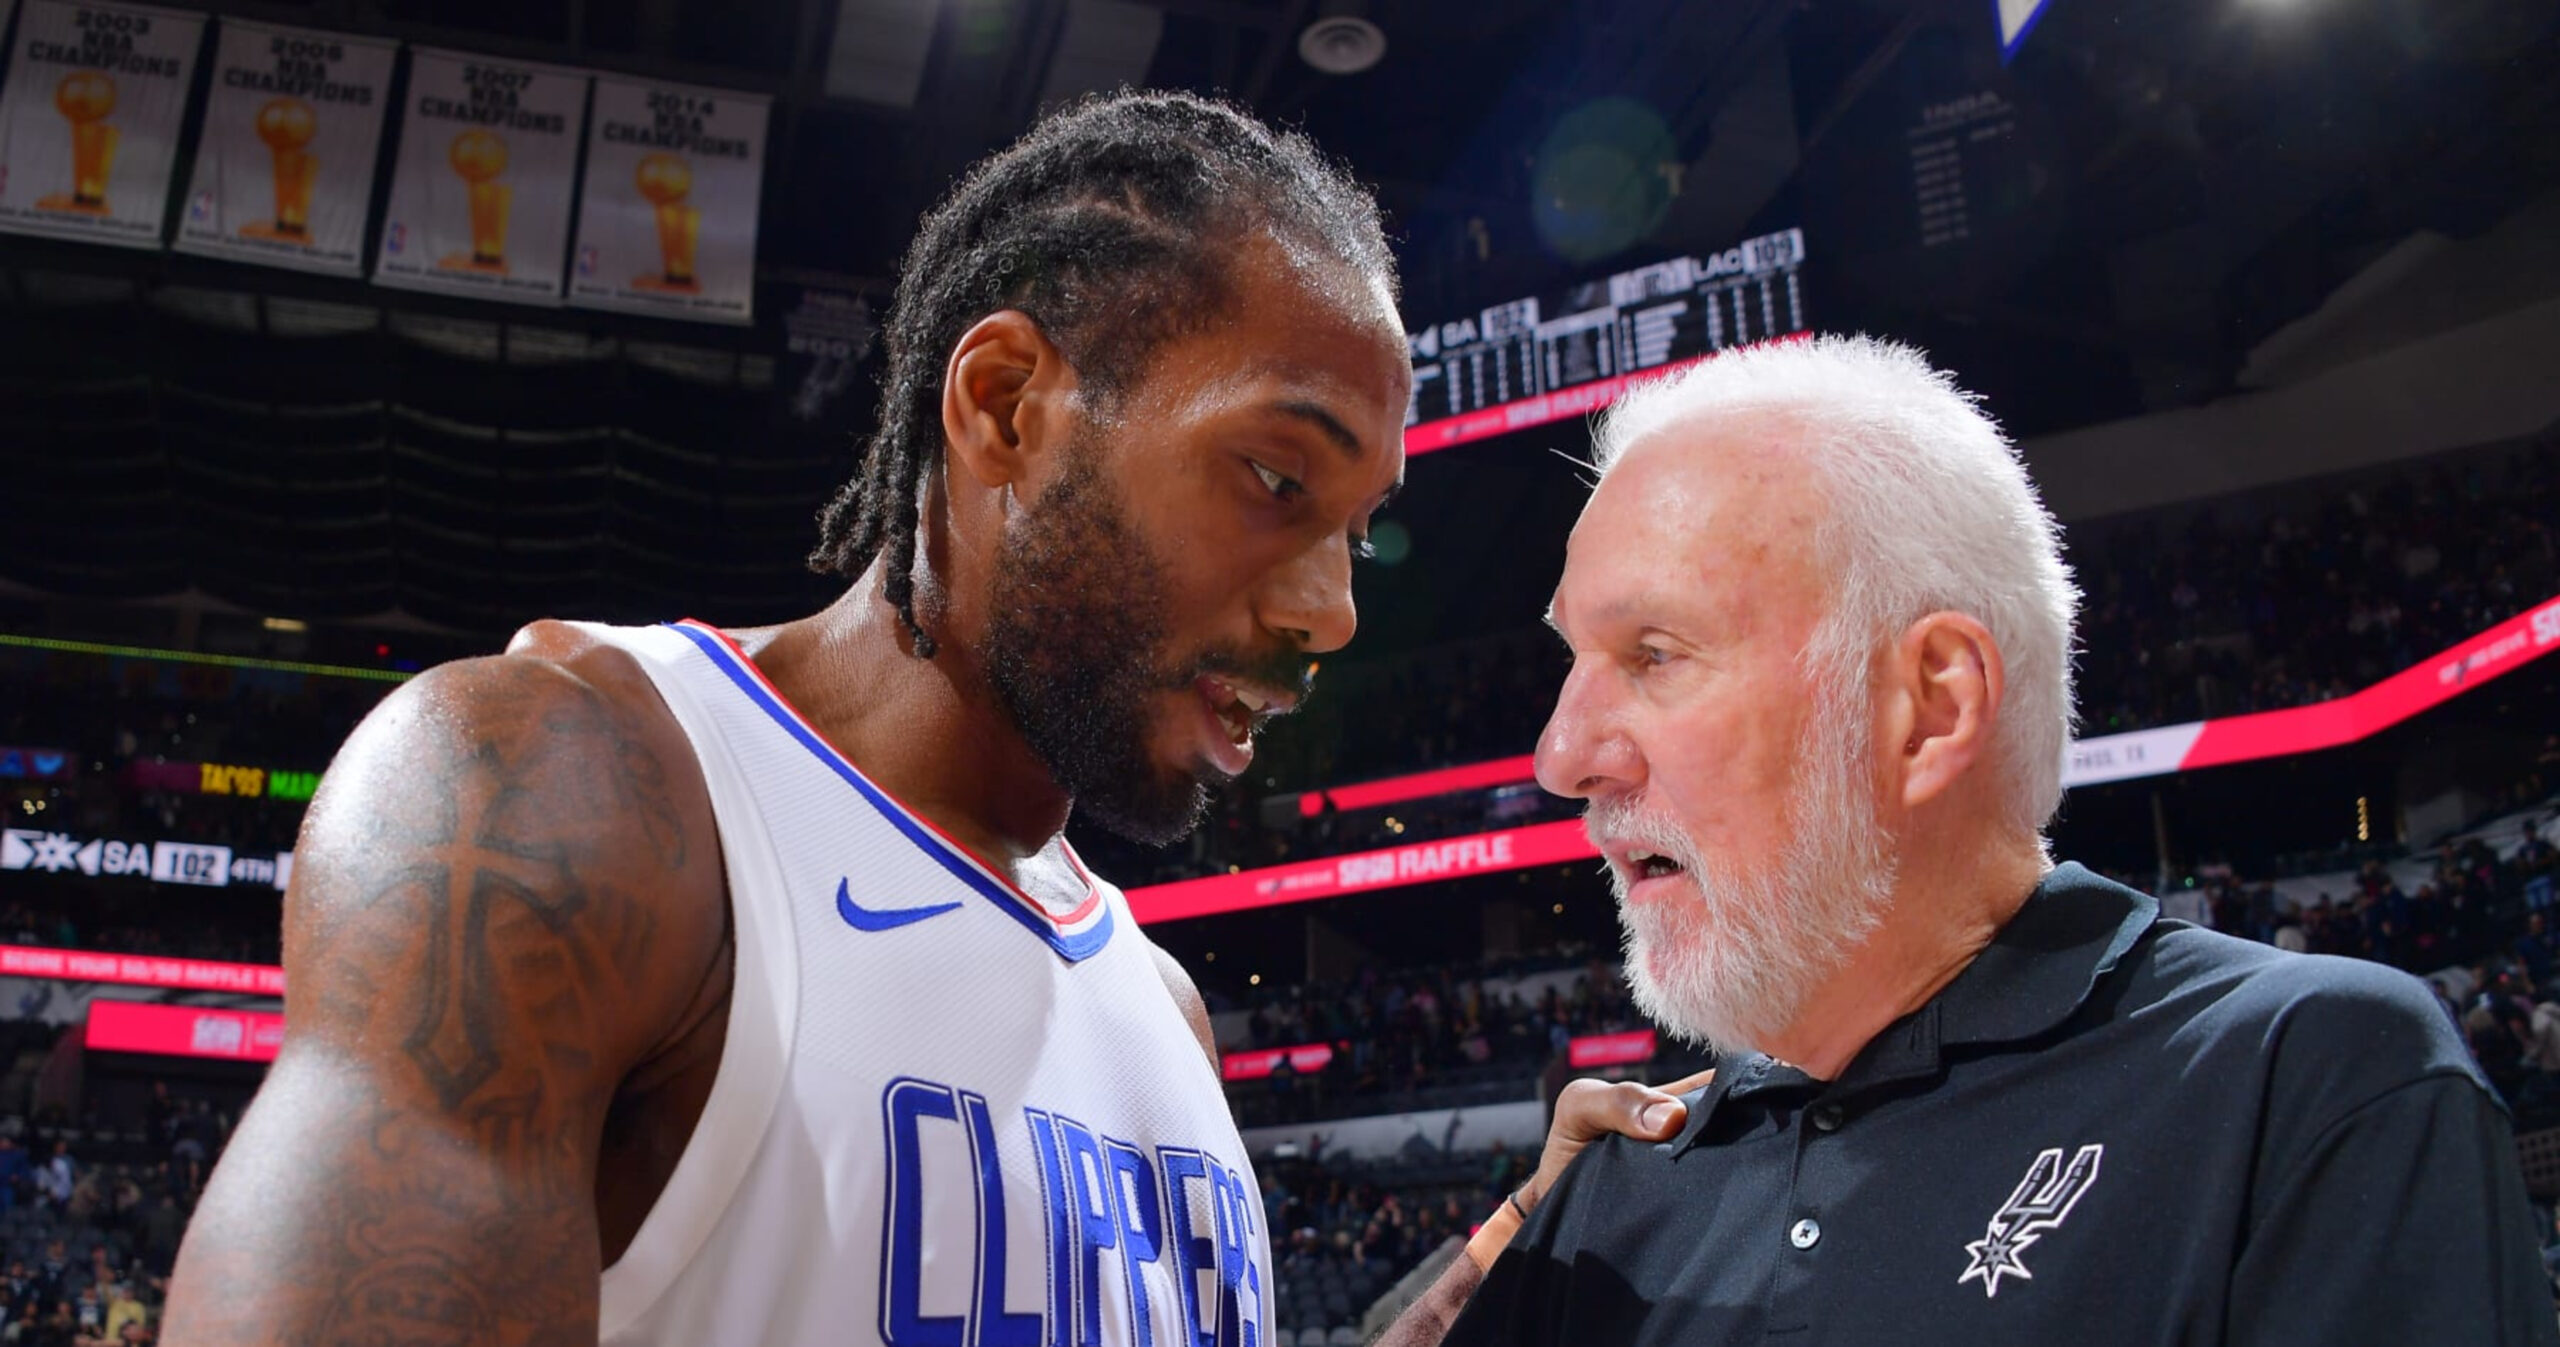 Gregg Popovich on Telling Spurs Crowd Not to Boo Kawhi: ‘You Don’t Poke the Bear’